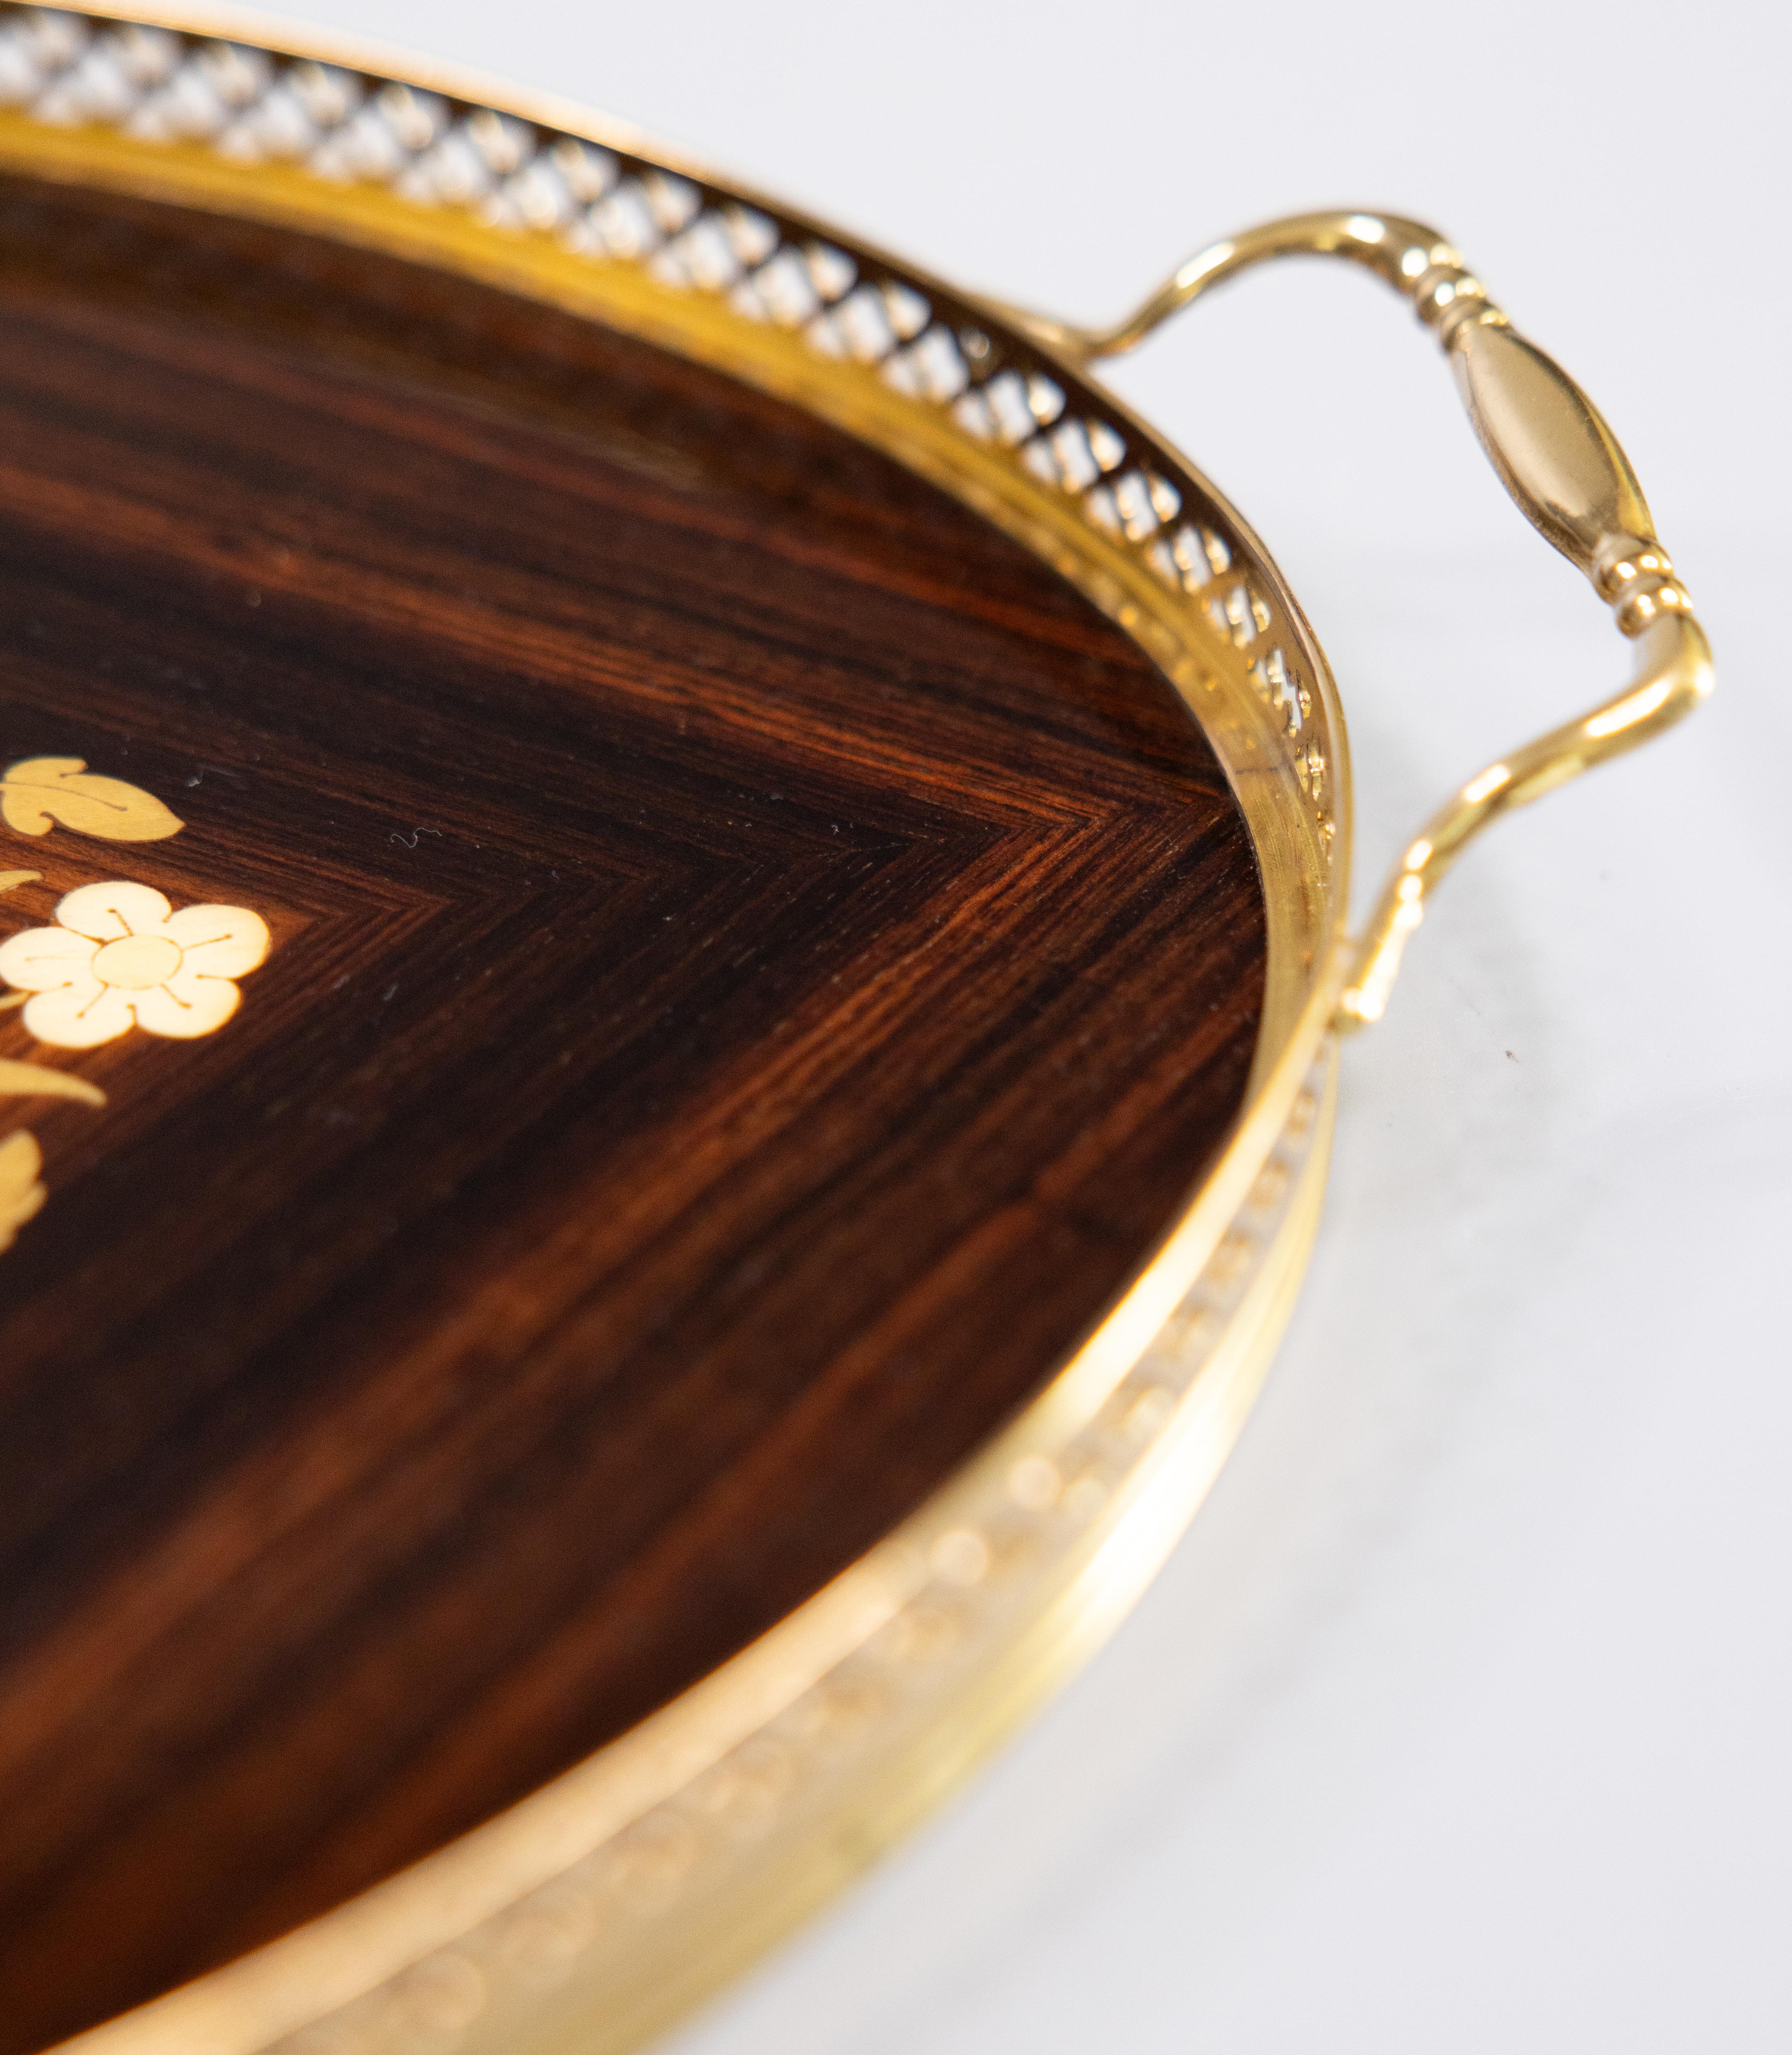 20th Century Italian Marquetry Inlaid Rosewood & Brass Gallery Oval Serving Tray, circa 1950